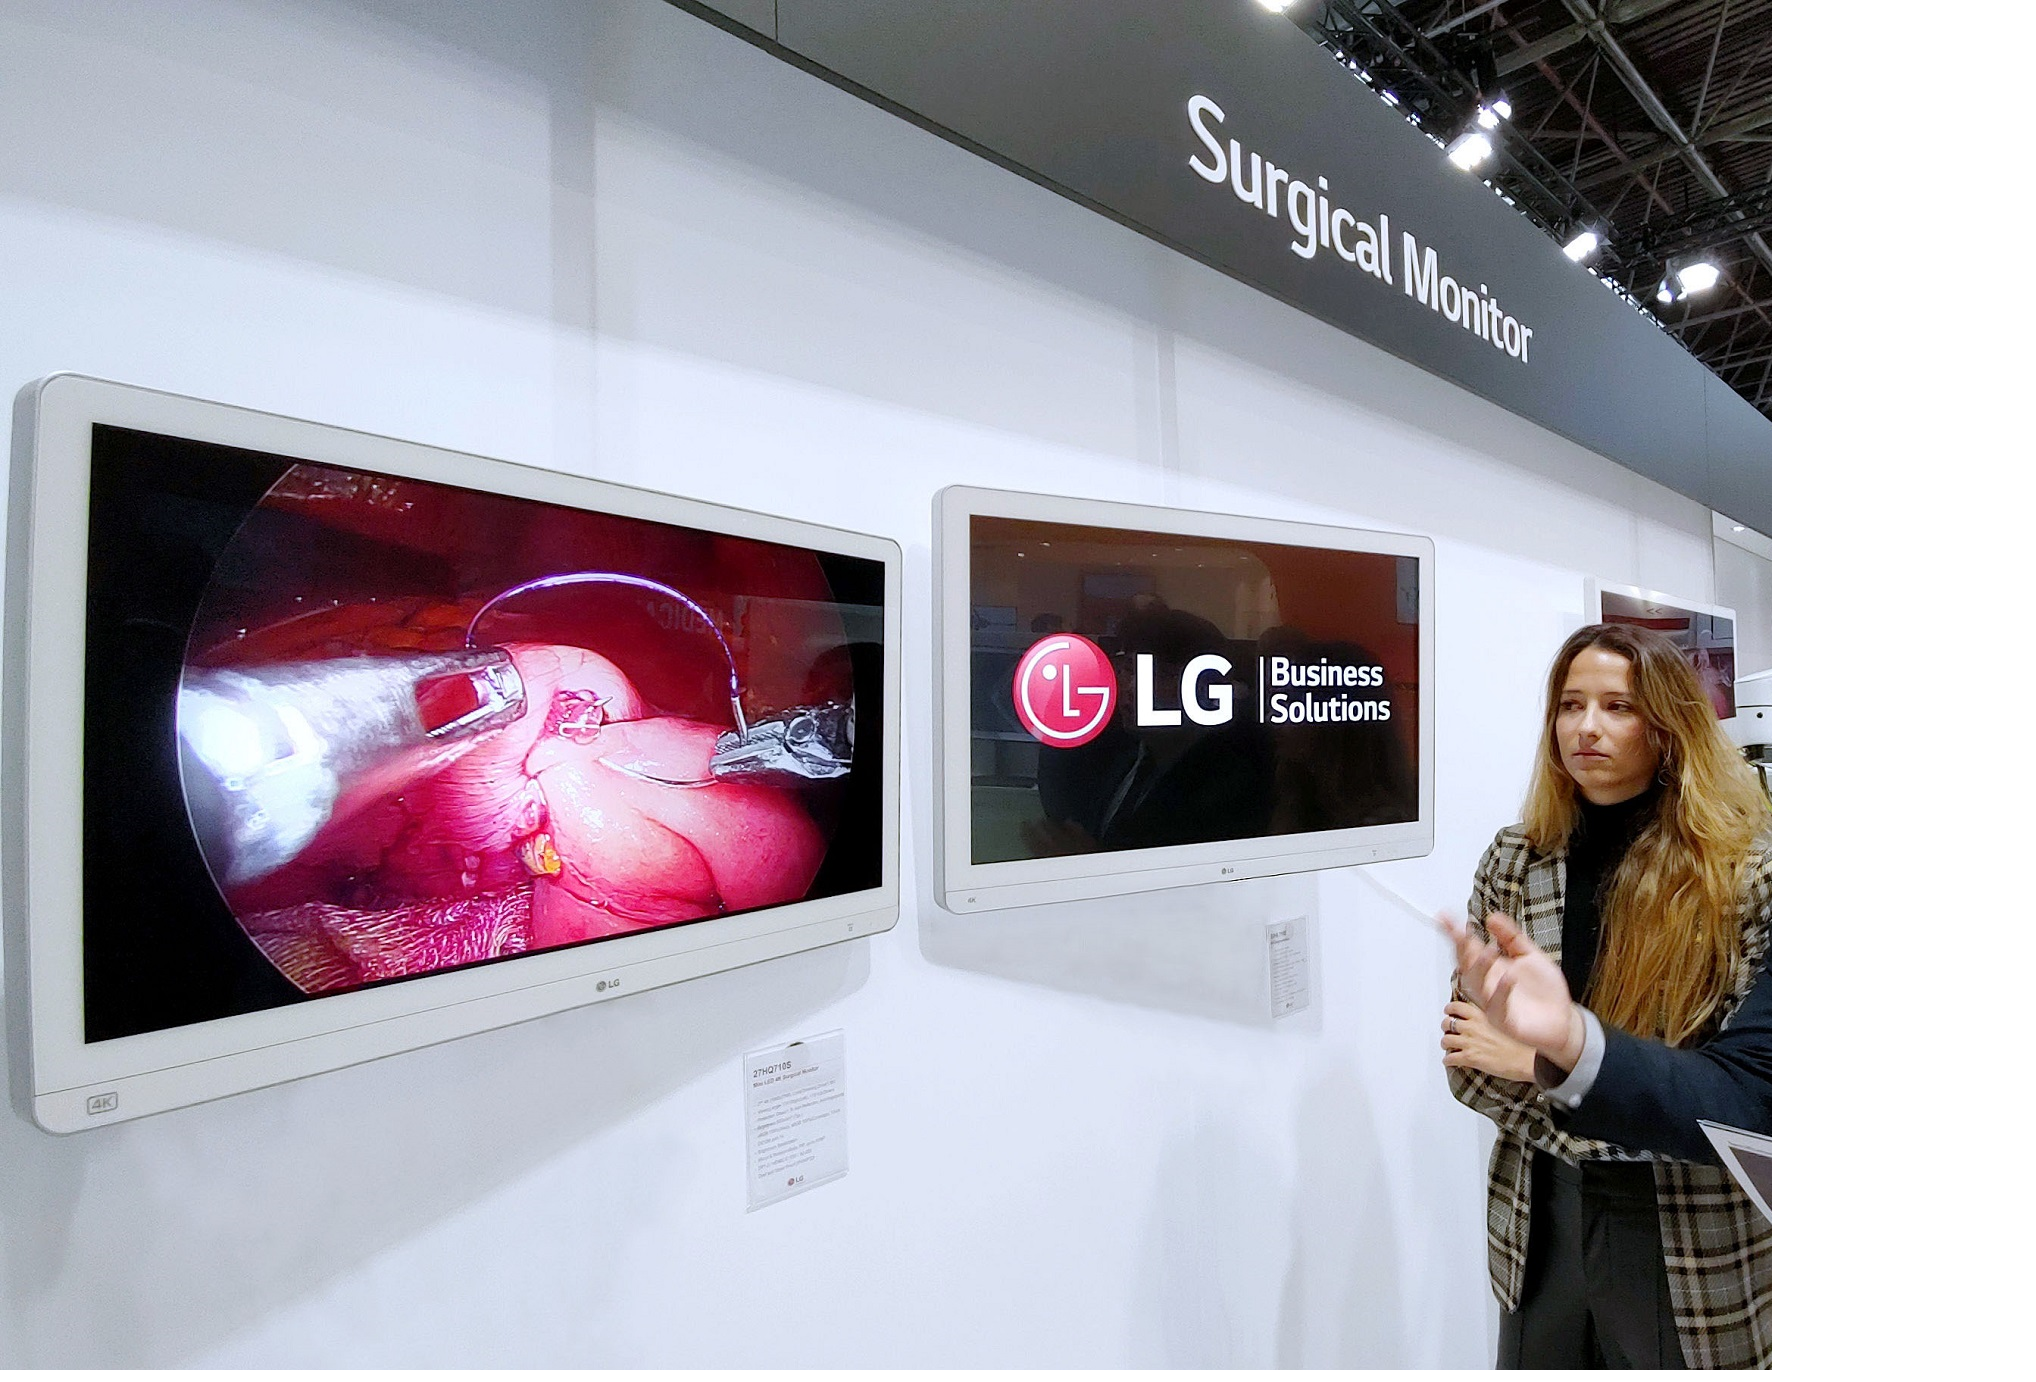 LG booth in MEDICA – A staff is introducing LG medical monitors to a visitor